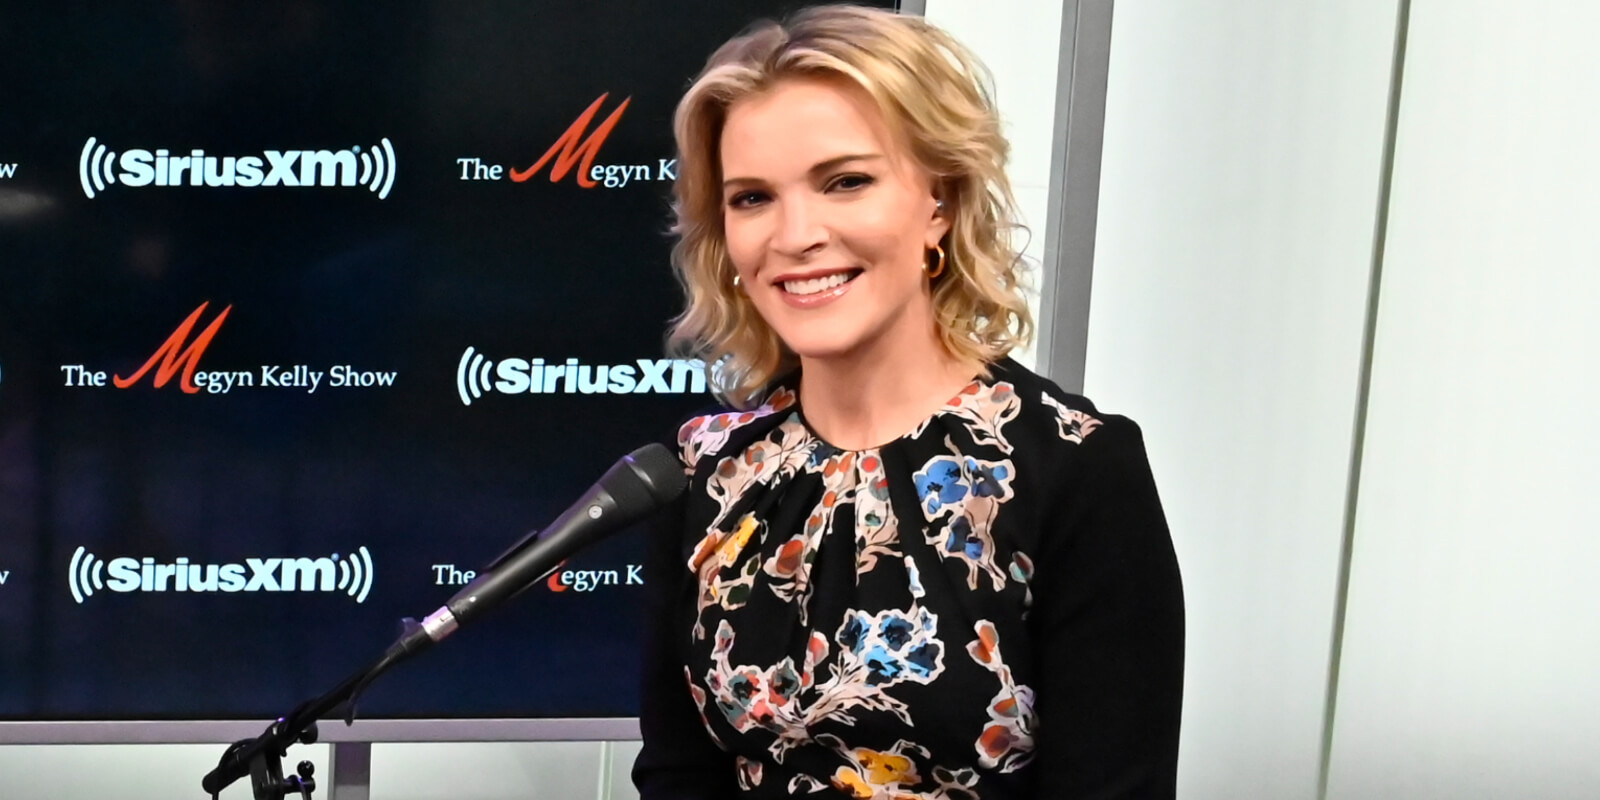 Megyn Kelly at her Sirius XM talk show and podcast.